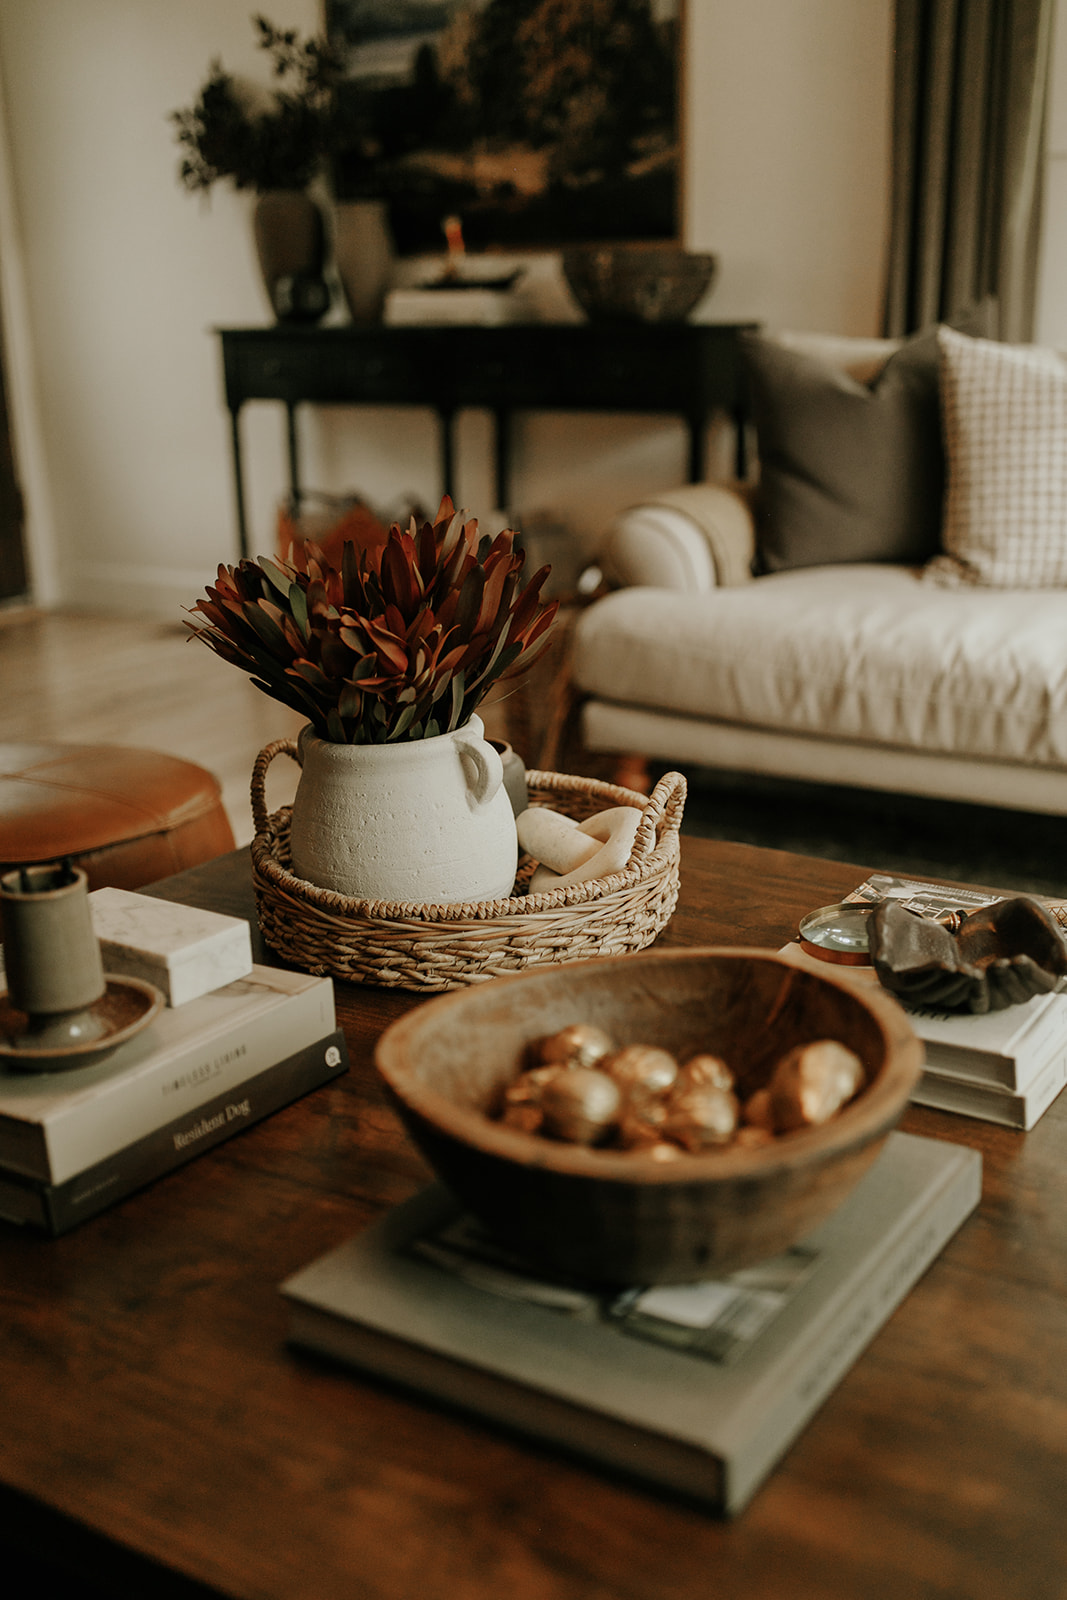 A coffee table sits in a living room, decorated with coffee table books, flowers, and vintage décor items